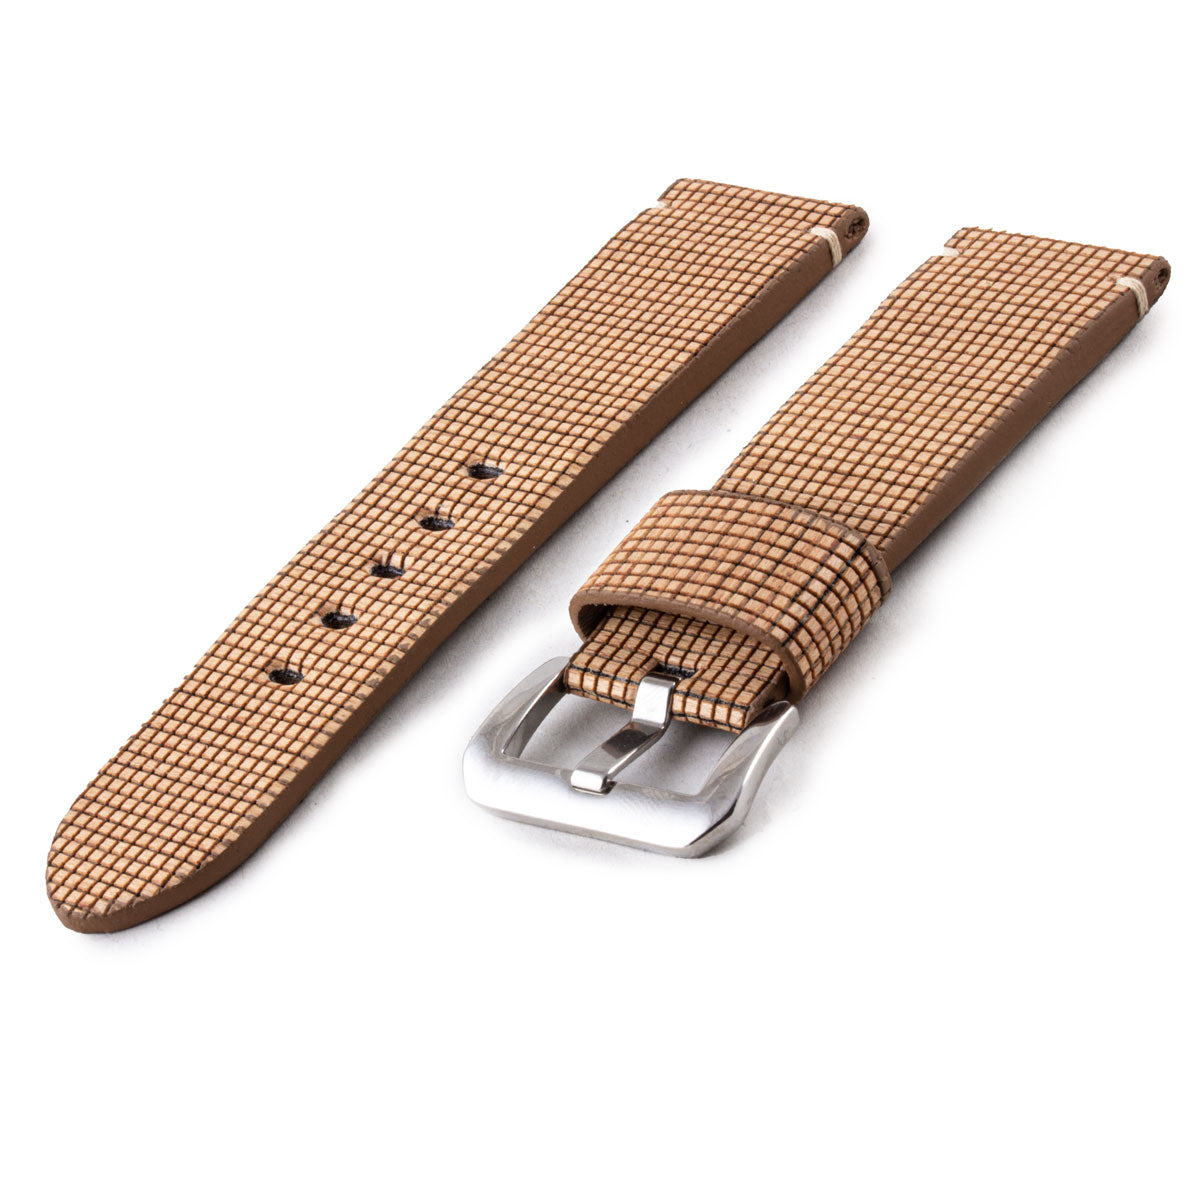 Eco-friendly watch strap for Panerai watches - NUO Melamine Wooden sheet